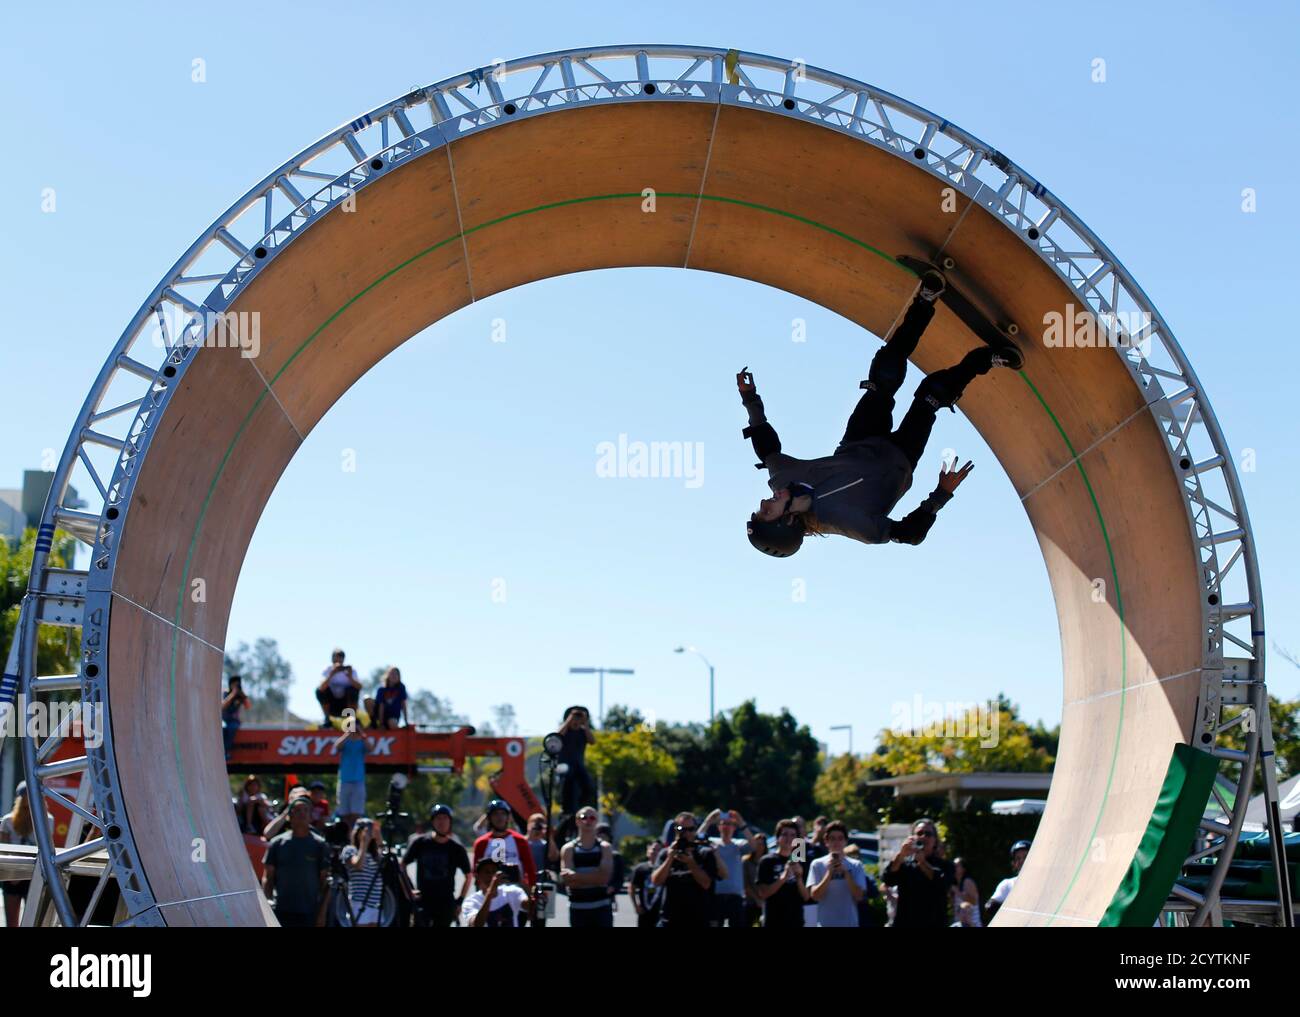 Skateboarder Aaron "Jaws" Homoki of Phoenix, Arizona manages to stay on his  board as he completes his attempt to ride a 15-foot (4.6-metre) high skateboard  loop in Vista, California October 20, 2013.